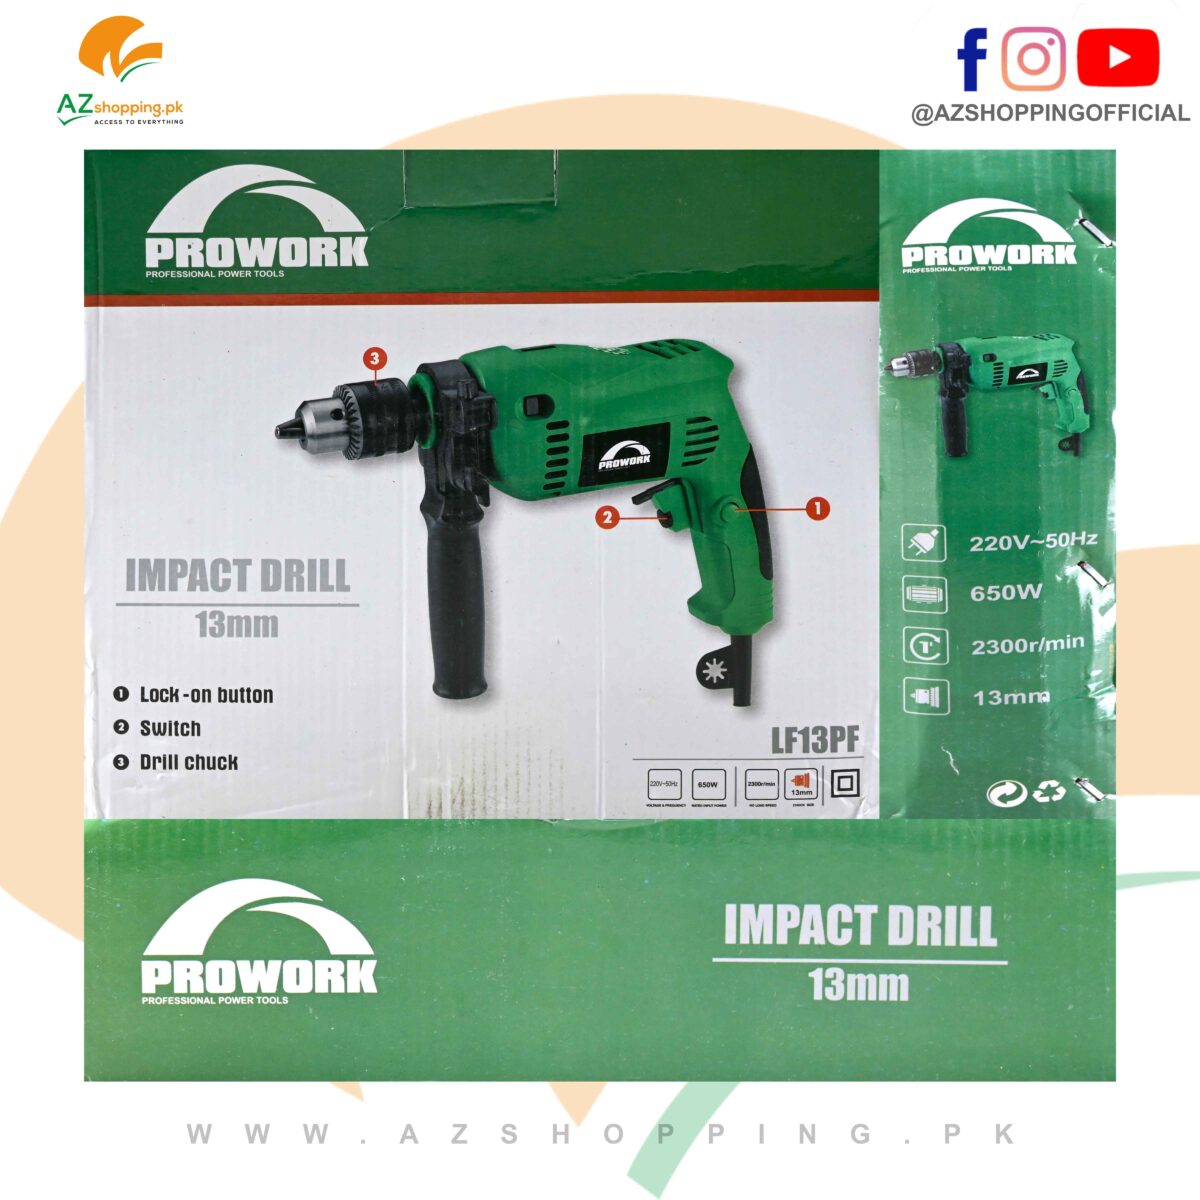 Prowork – Impact Drill Machine 13mm with Lock-on Button, Switch, Drill Chuck – Model: LF13PF